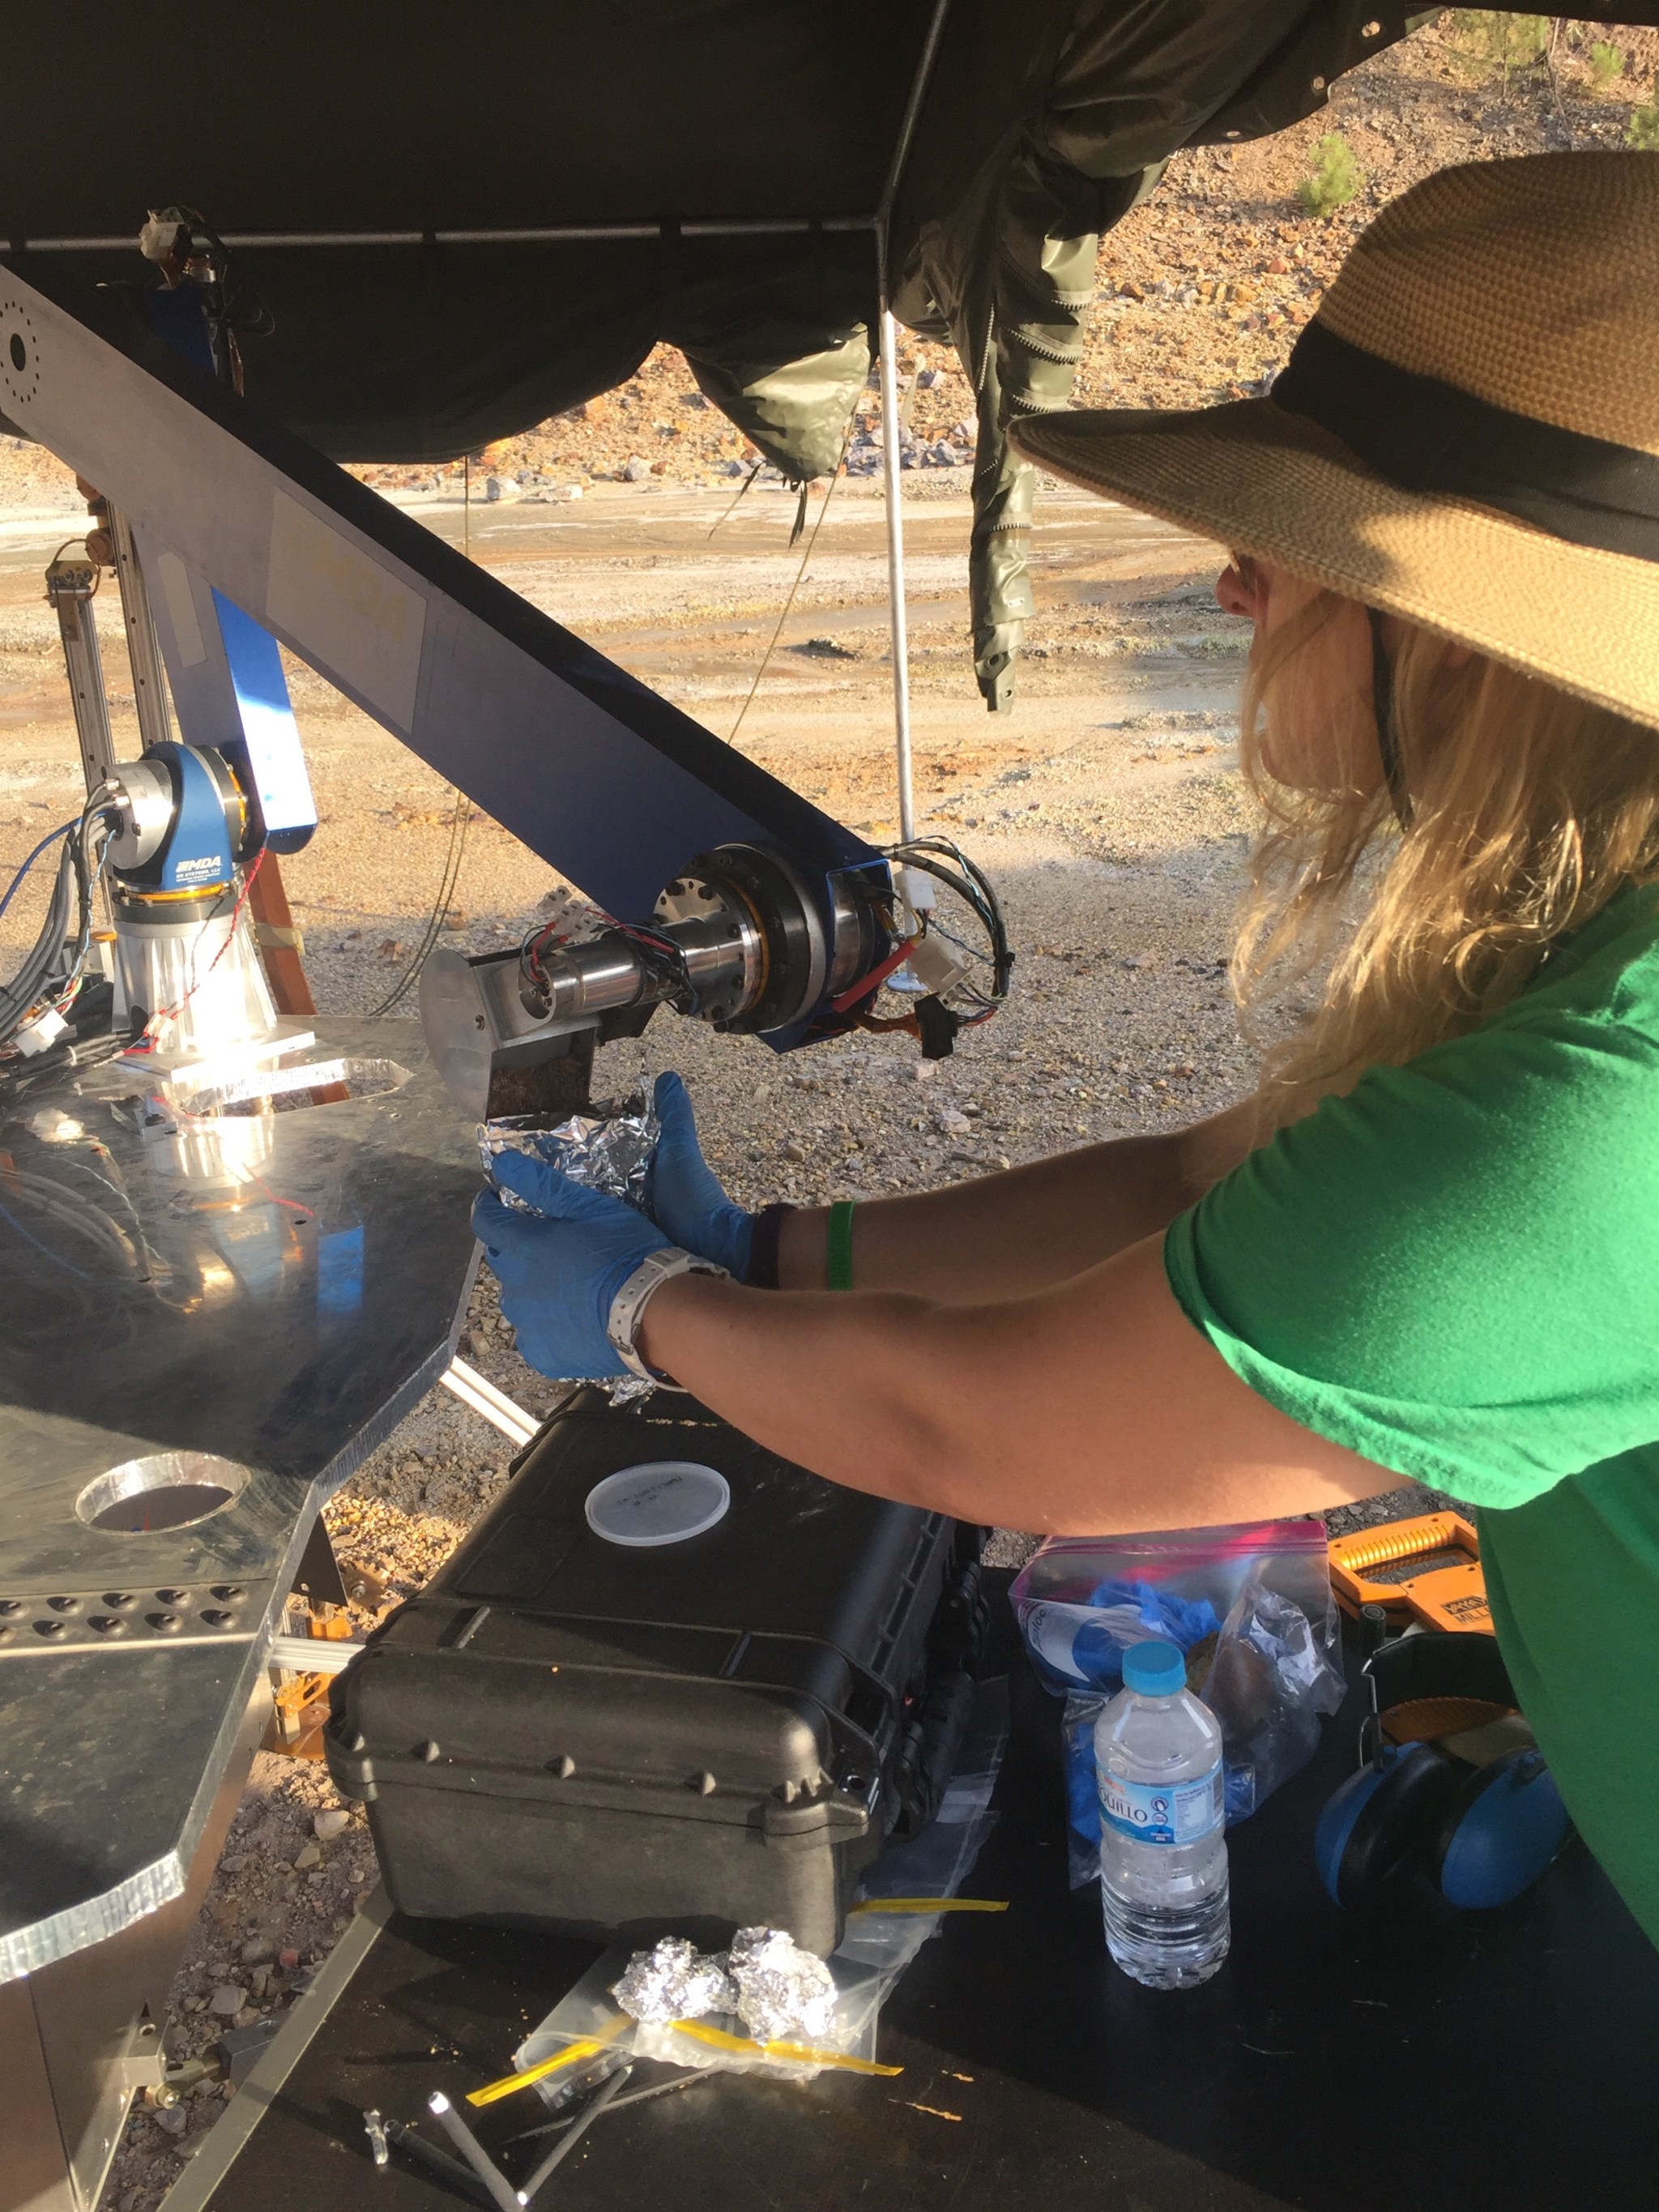 Deniz Burnham at a field test of drilling and sampling prototype instruments, as part of the Life-detection Mars Analog Project’s deployment at the Rio Tinto, Spain, Mars-analog site in the summer of 2017.